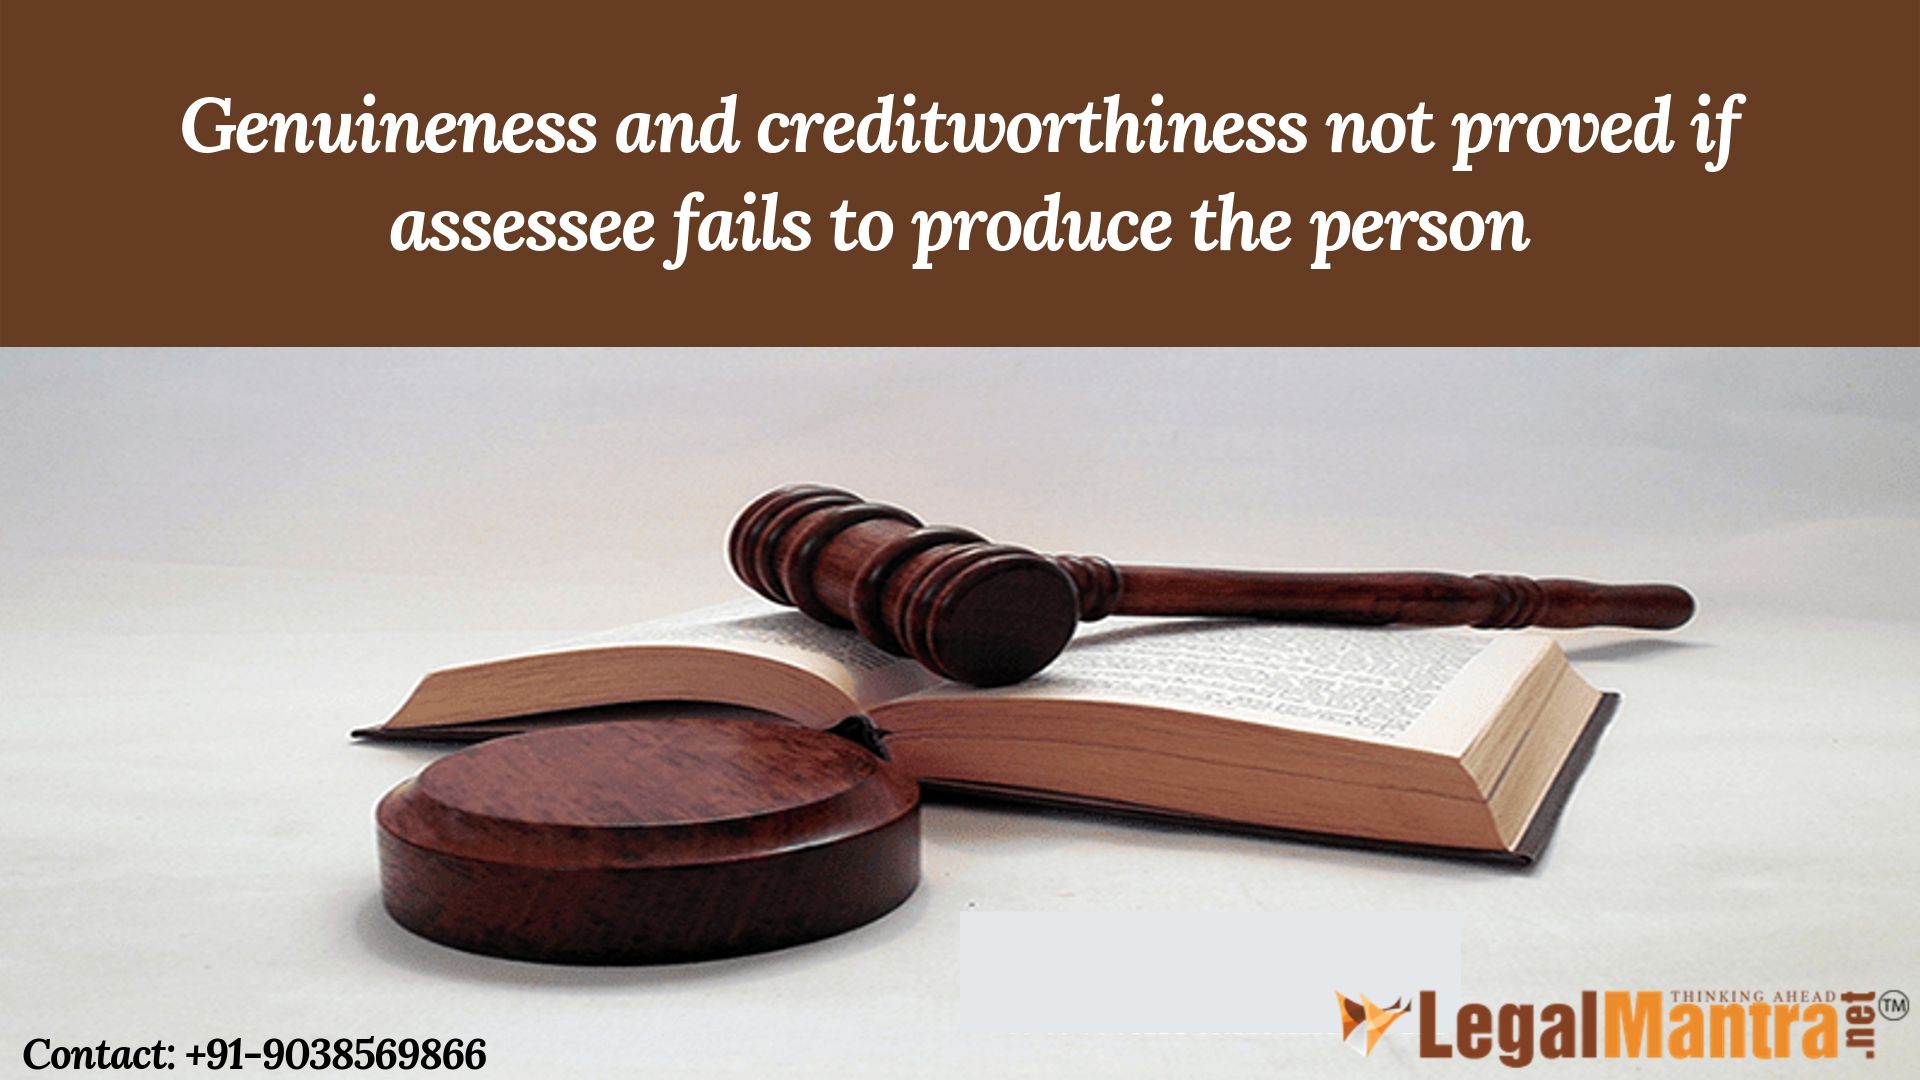 Genuineness and creditworthiness not proved if assessee failed to produce the person